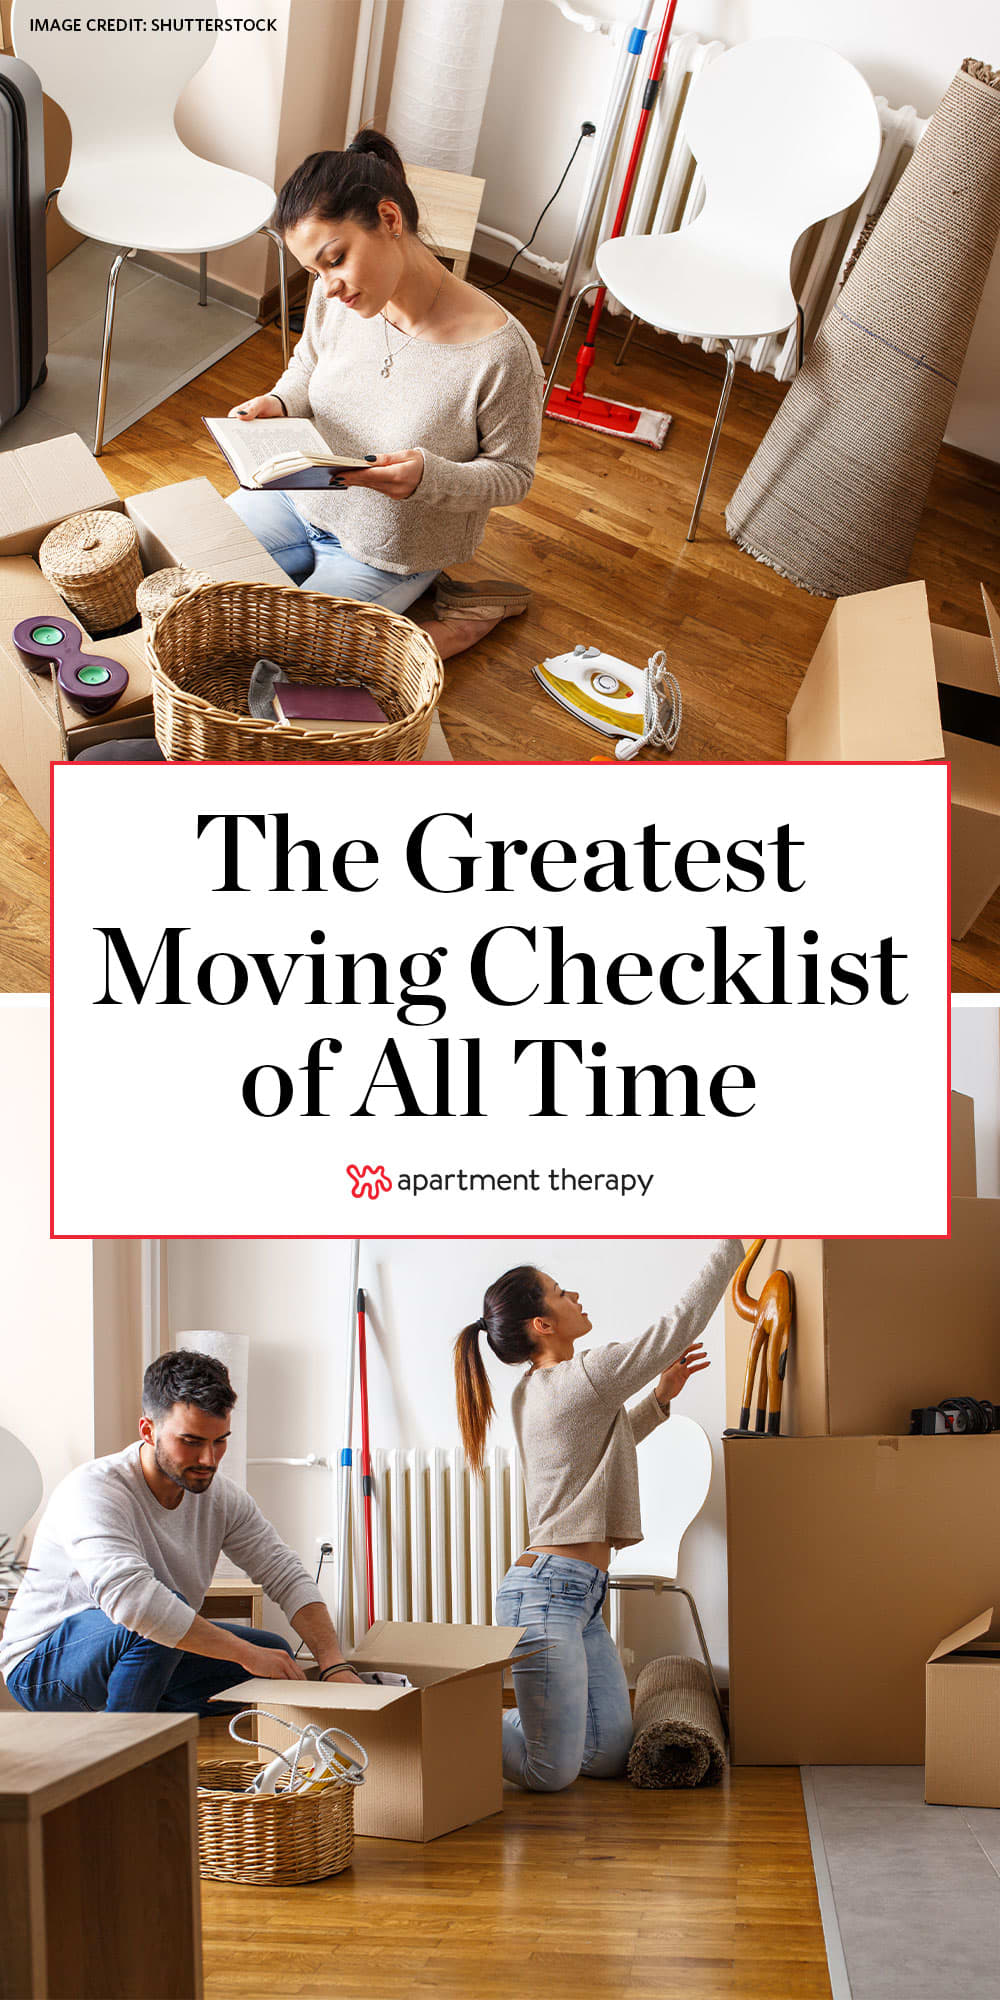 The Easiest First Apartment Checklist Ever - Moving Advice from